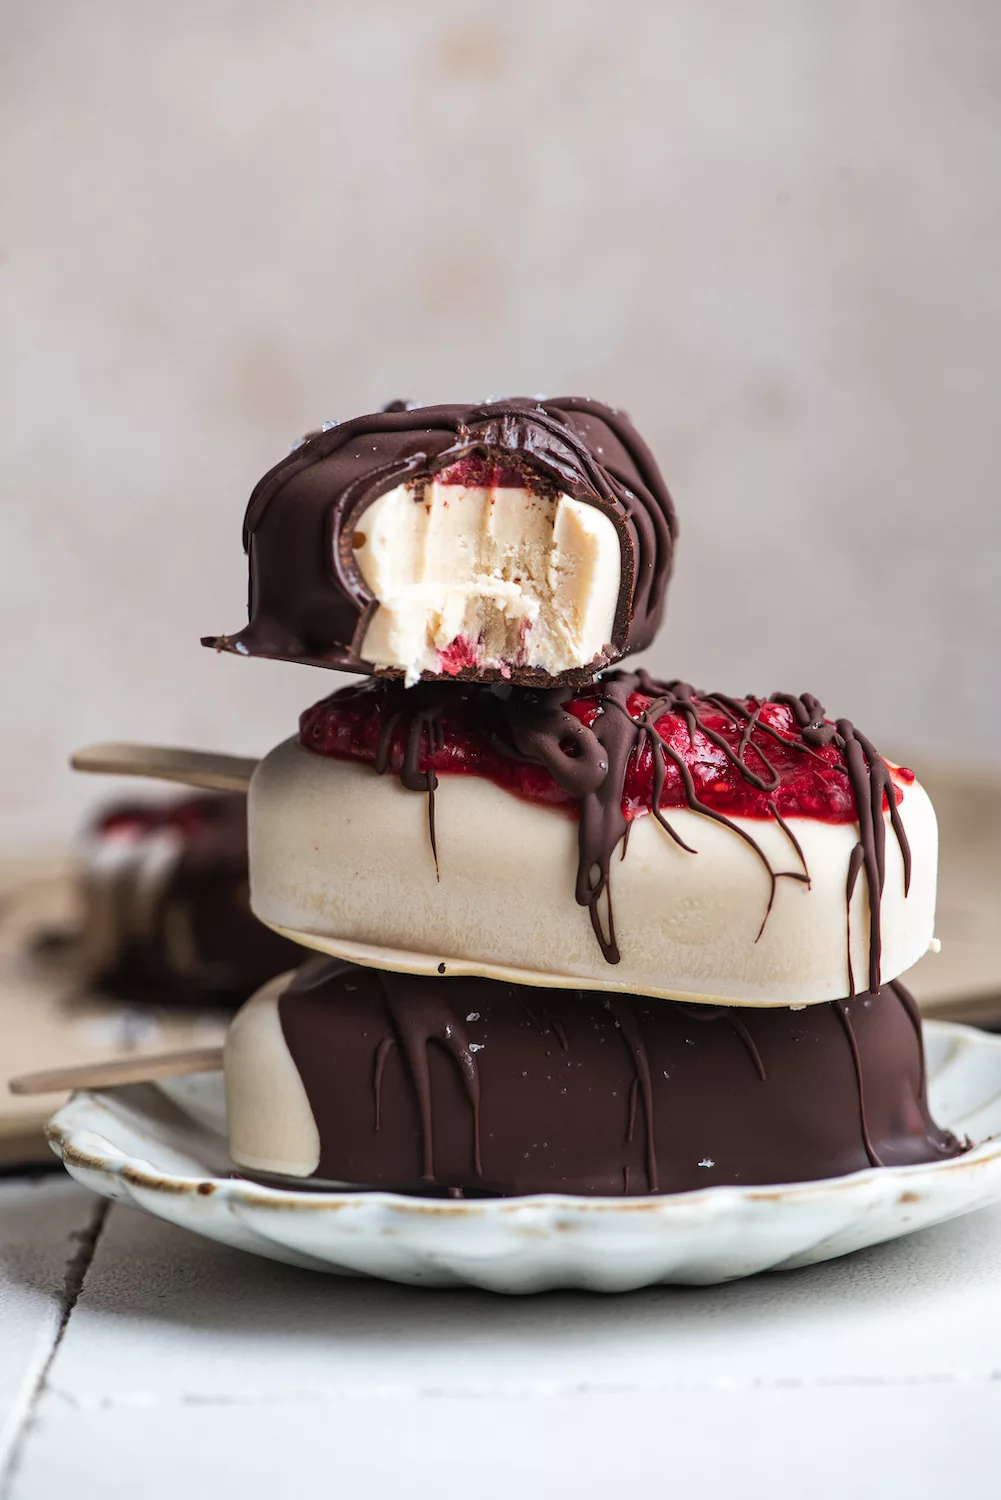 a stack of ice cream bars with strawberry jam oozing out of the chocolate dripped cover. top bar has a bite out of it